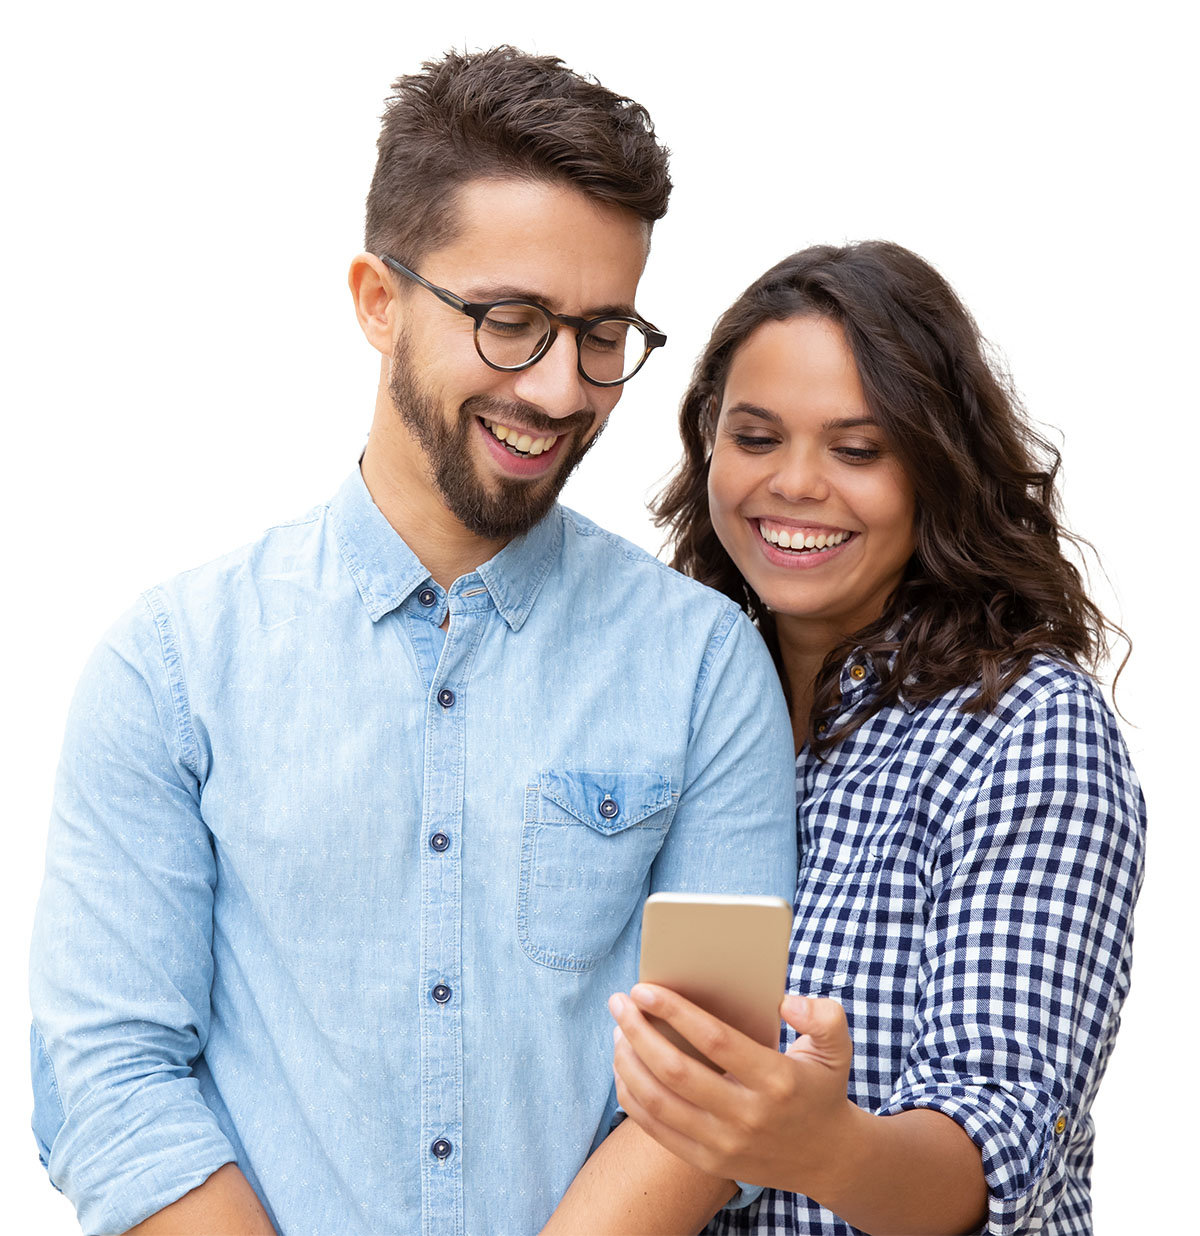 Smiling young couple using smartphone